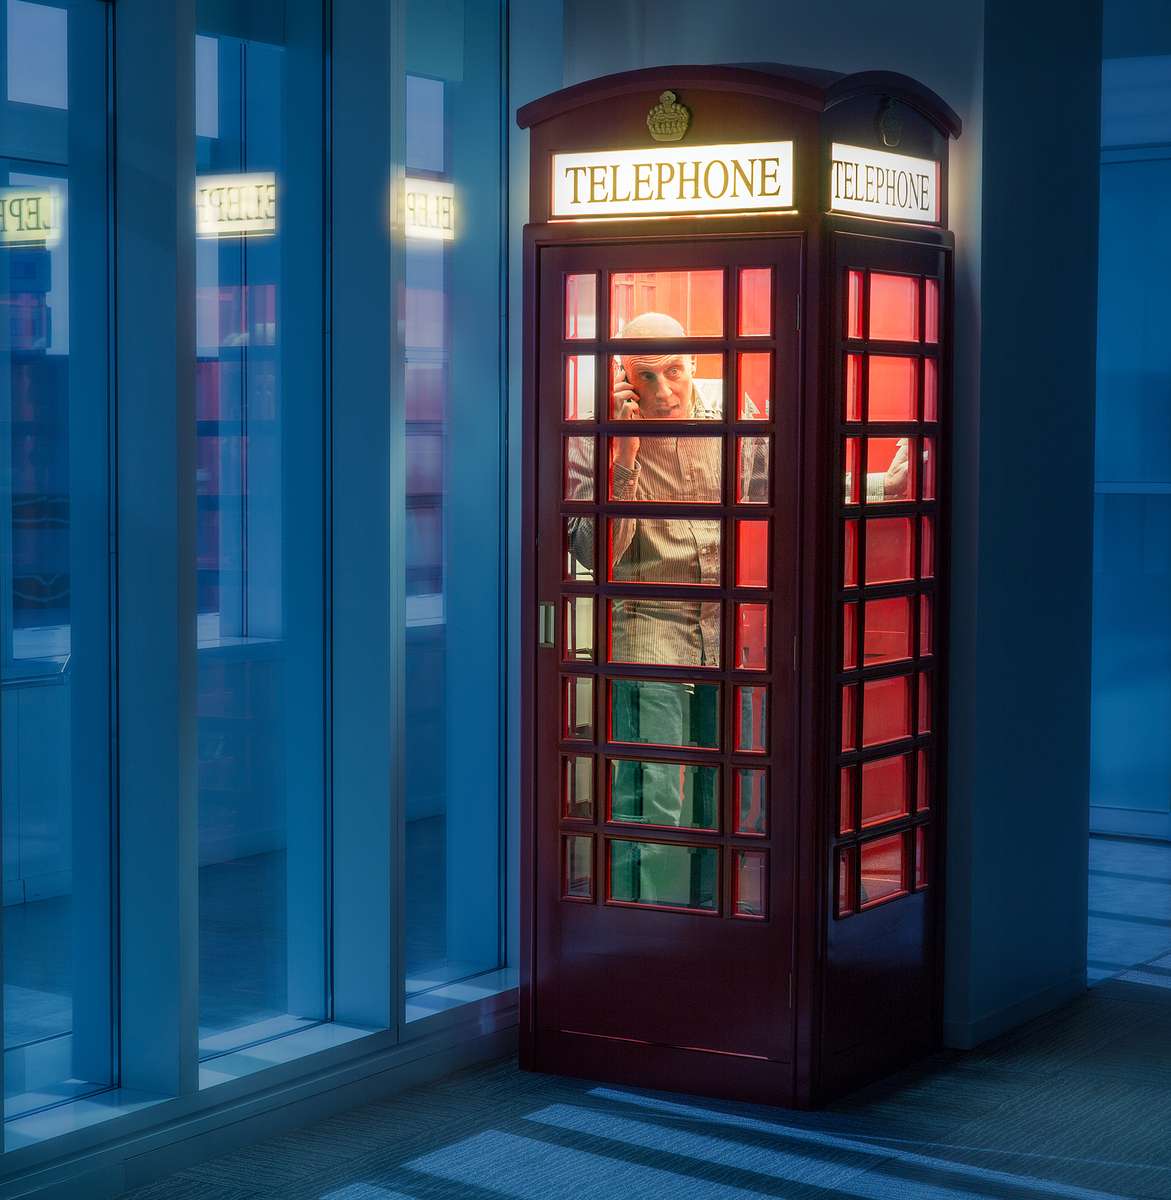 phone_booth-c-s